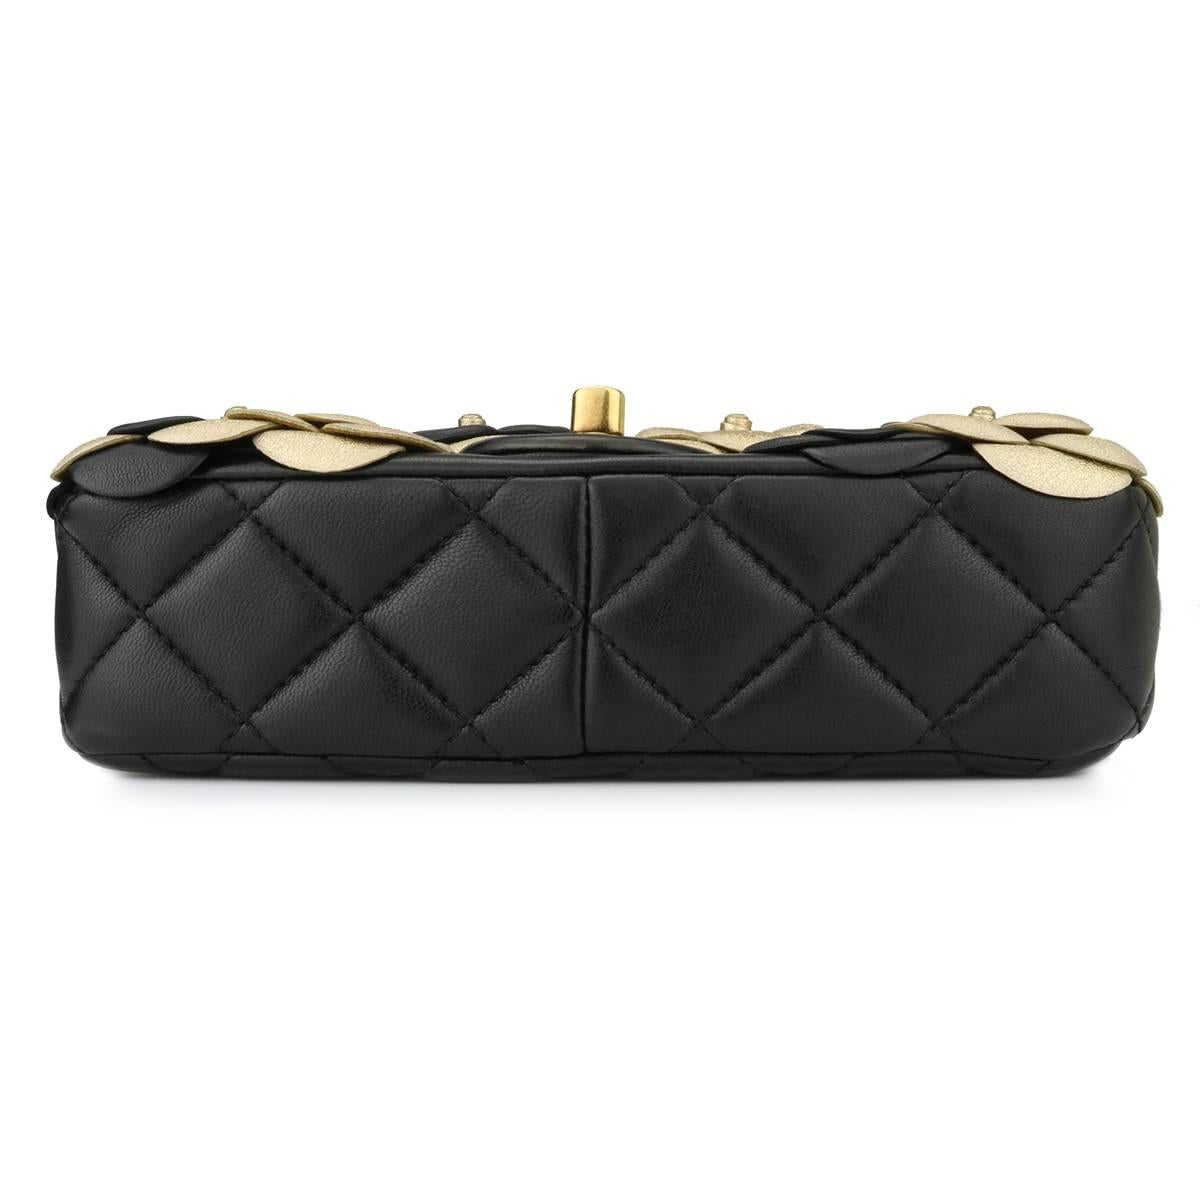 Women's or Men's Chanel Camellia Mini Black / Gold Lambskin bag with Antique Gold Hardware, 2015